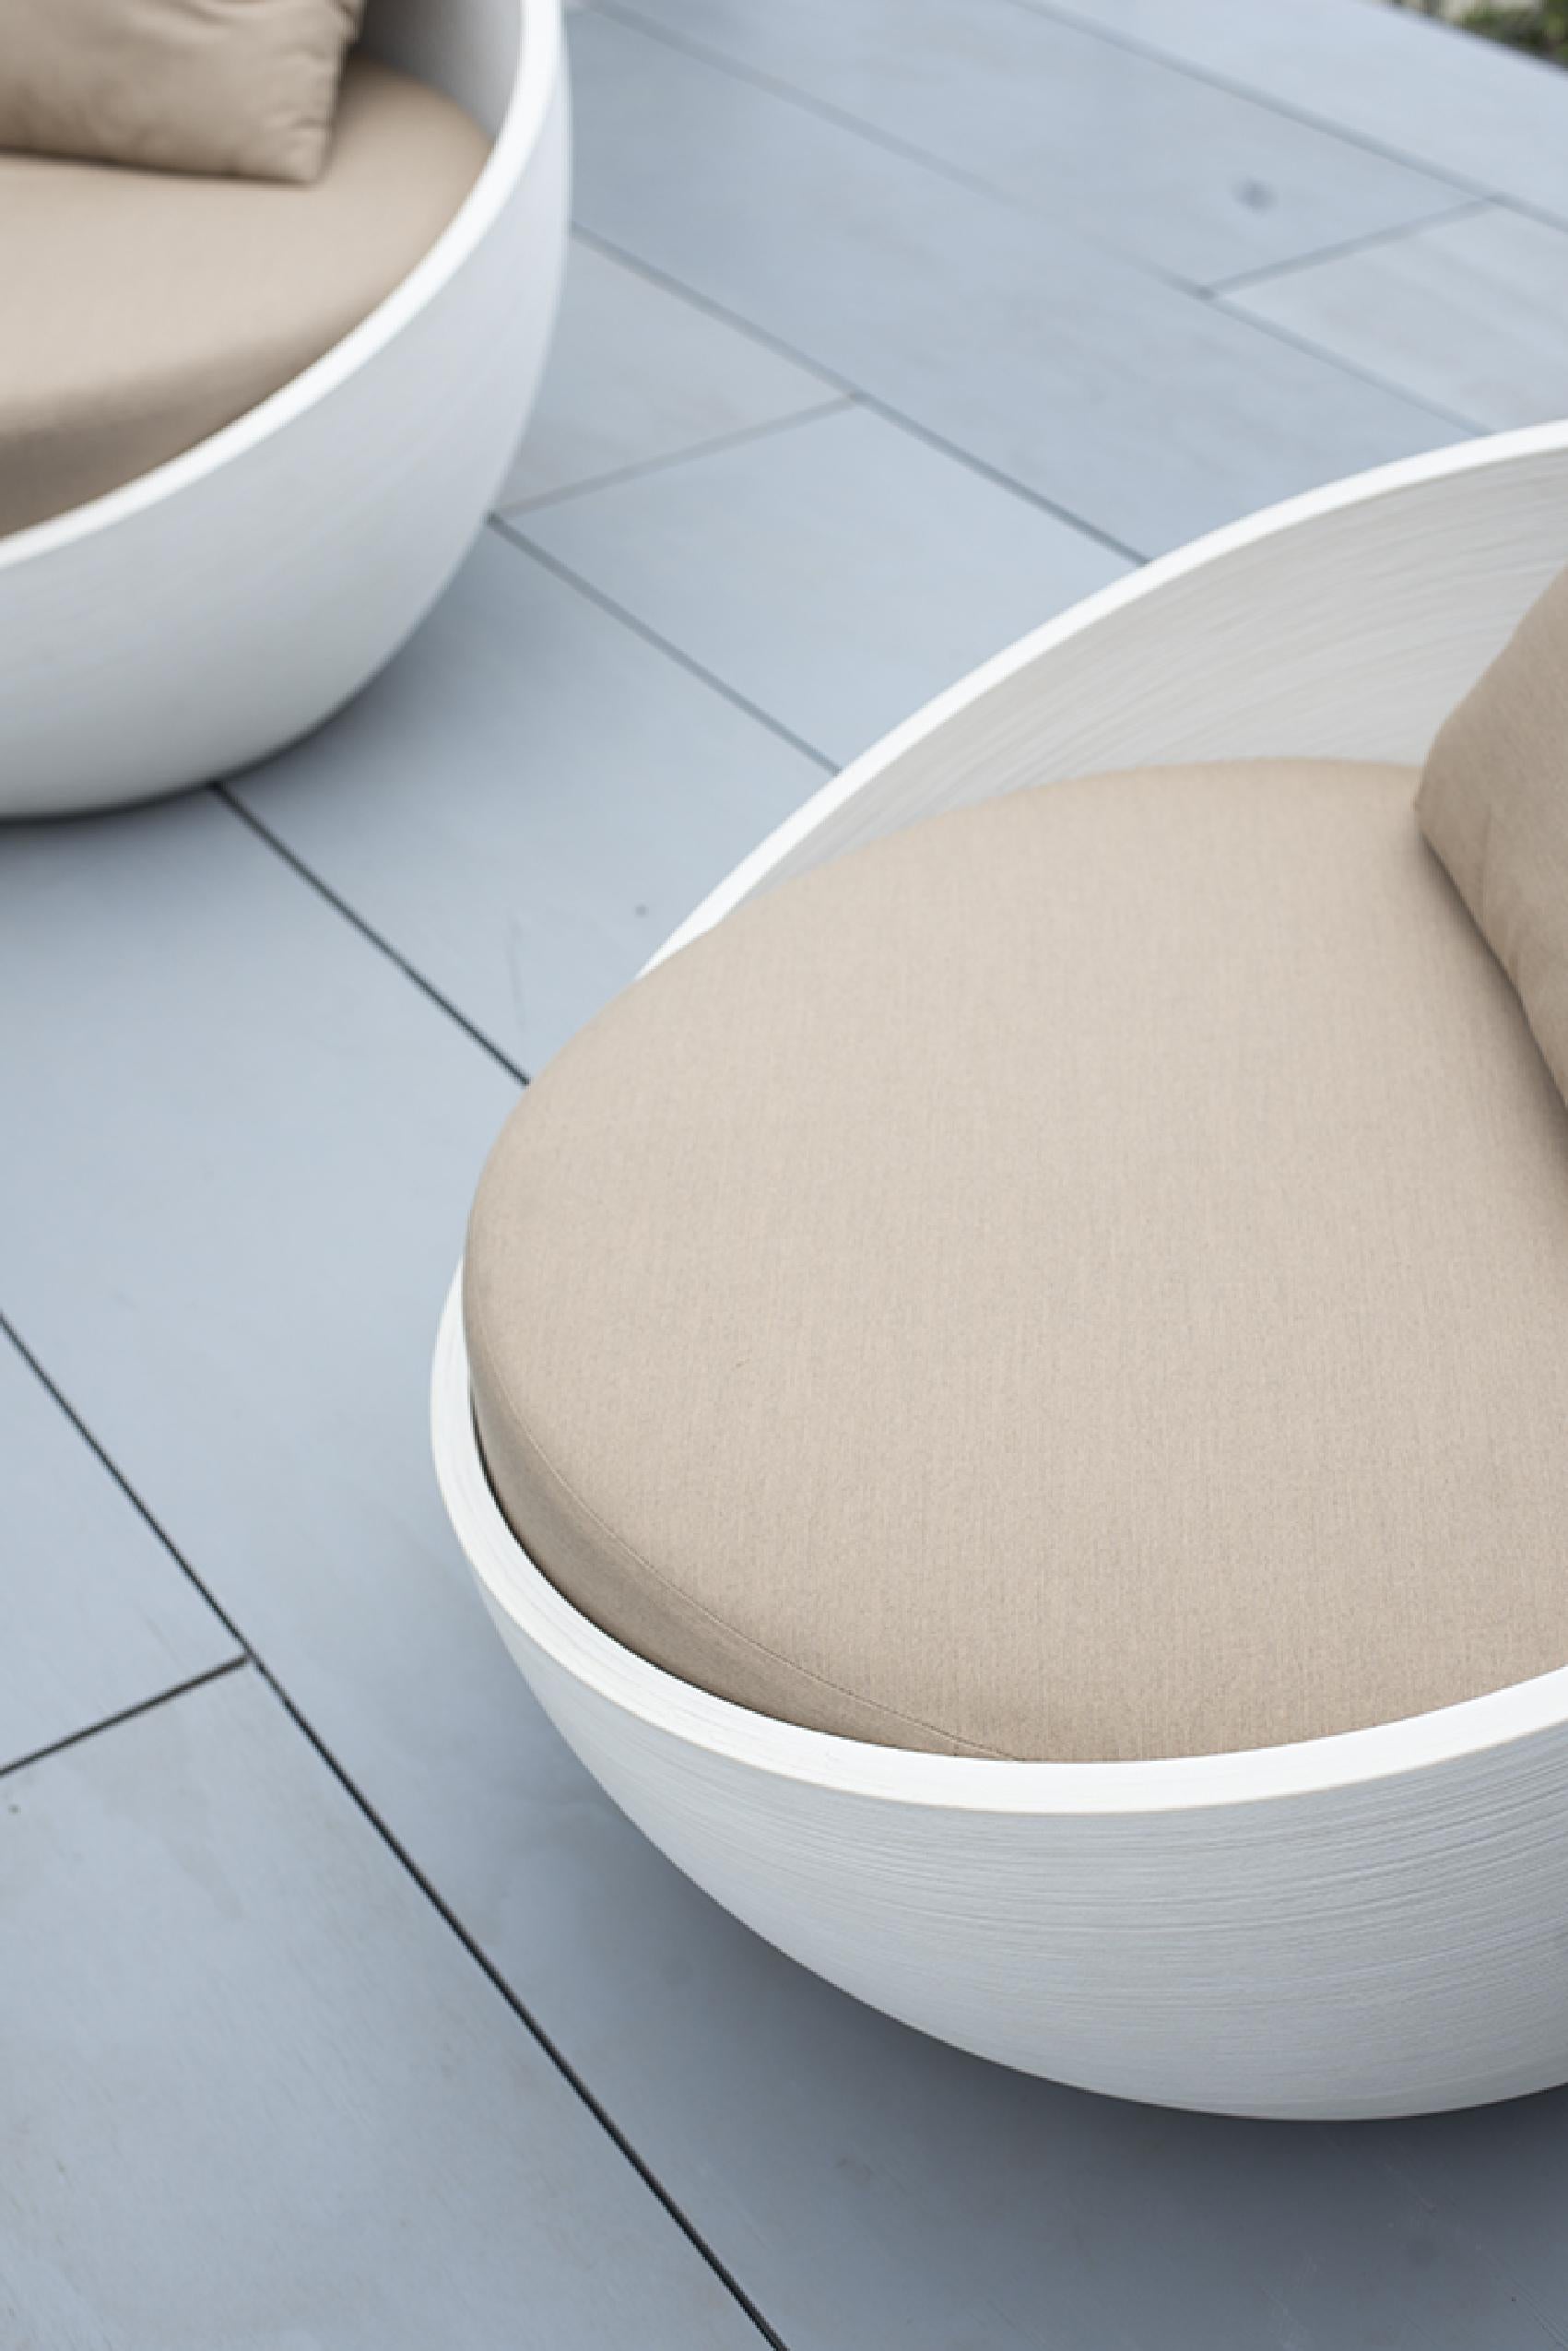 Guatemalan Uova by Piegatto, a Sculptural Outdoor Sofa For Sale